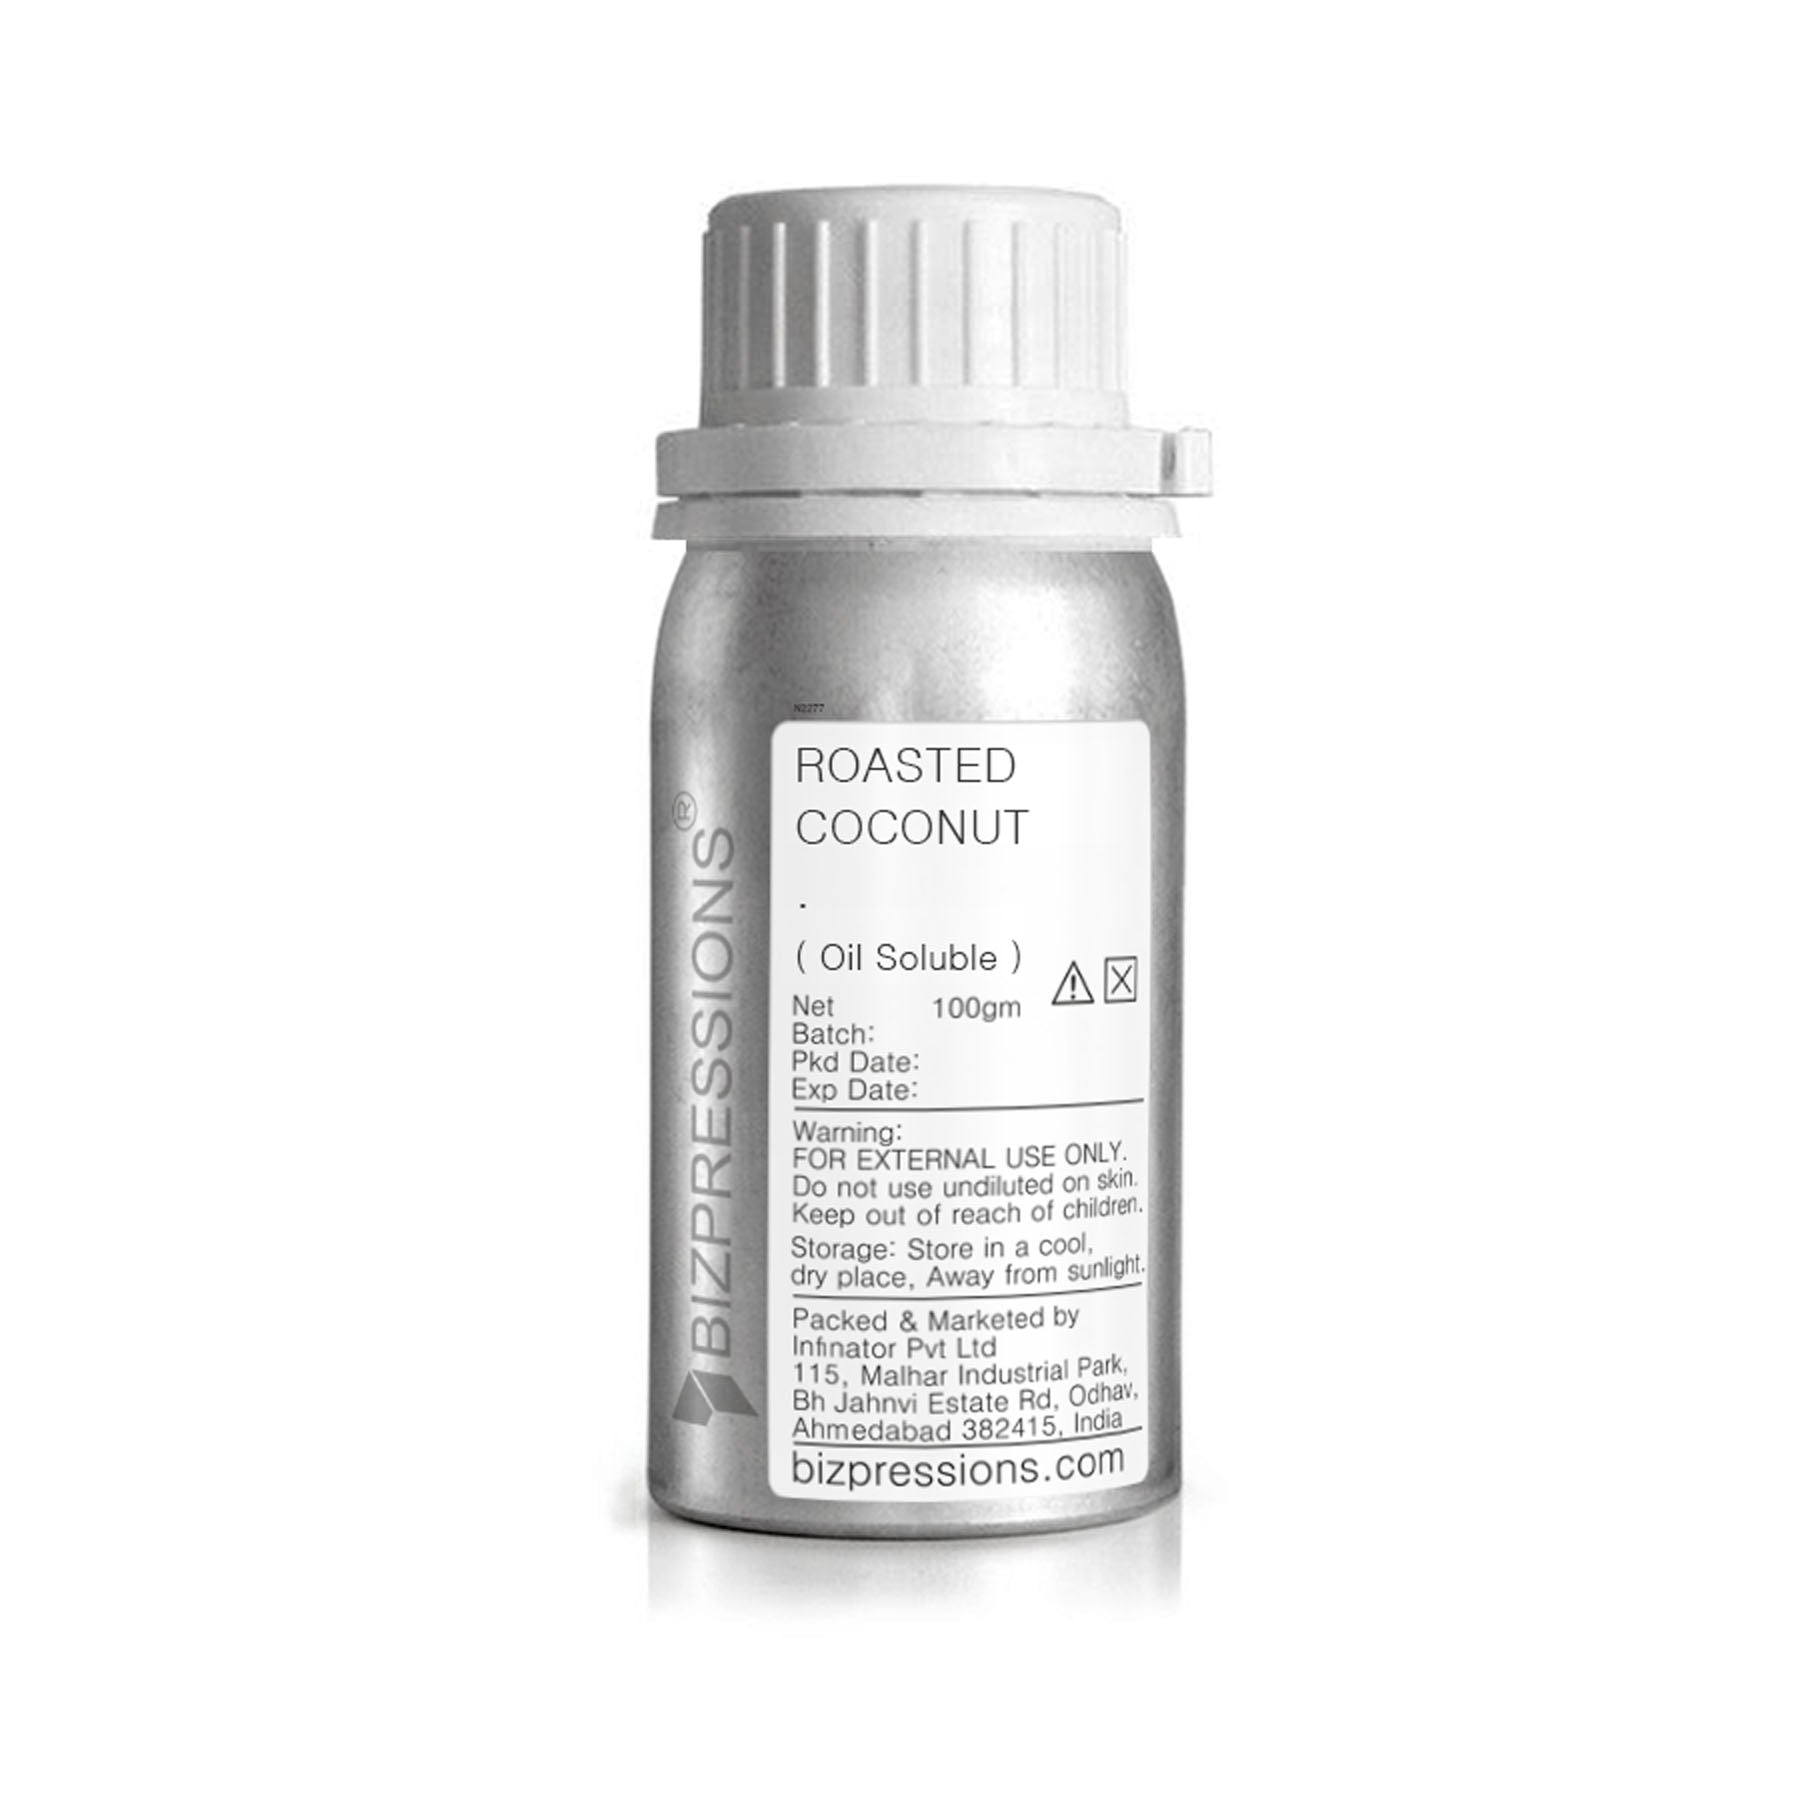 ROASTED COCONUT - Fragrance ( Oil Soluble ) - 100 gm